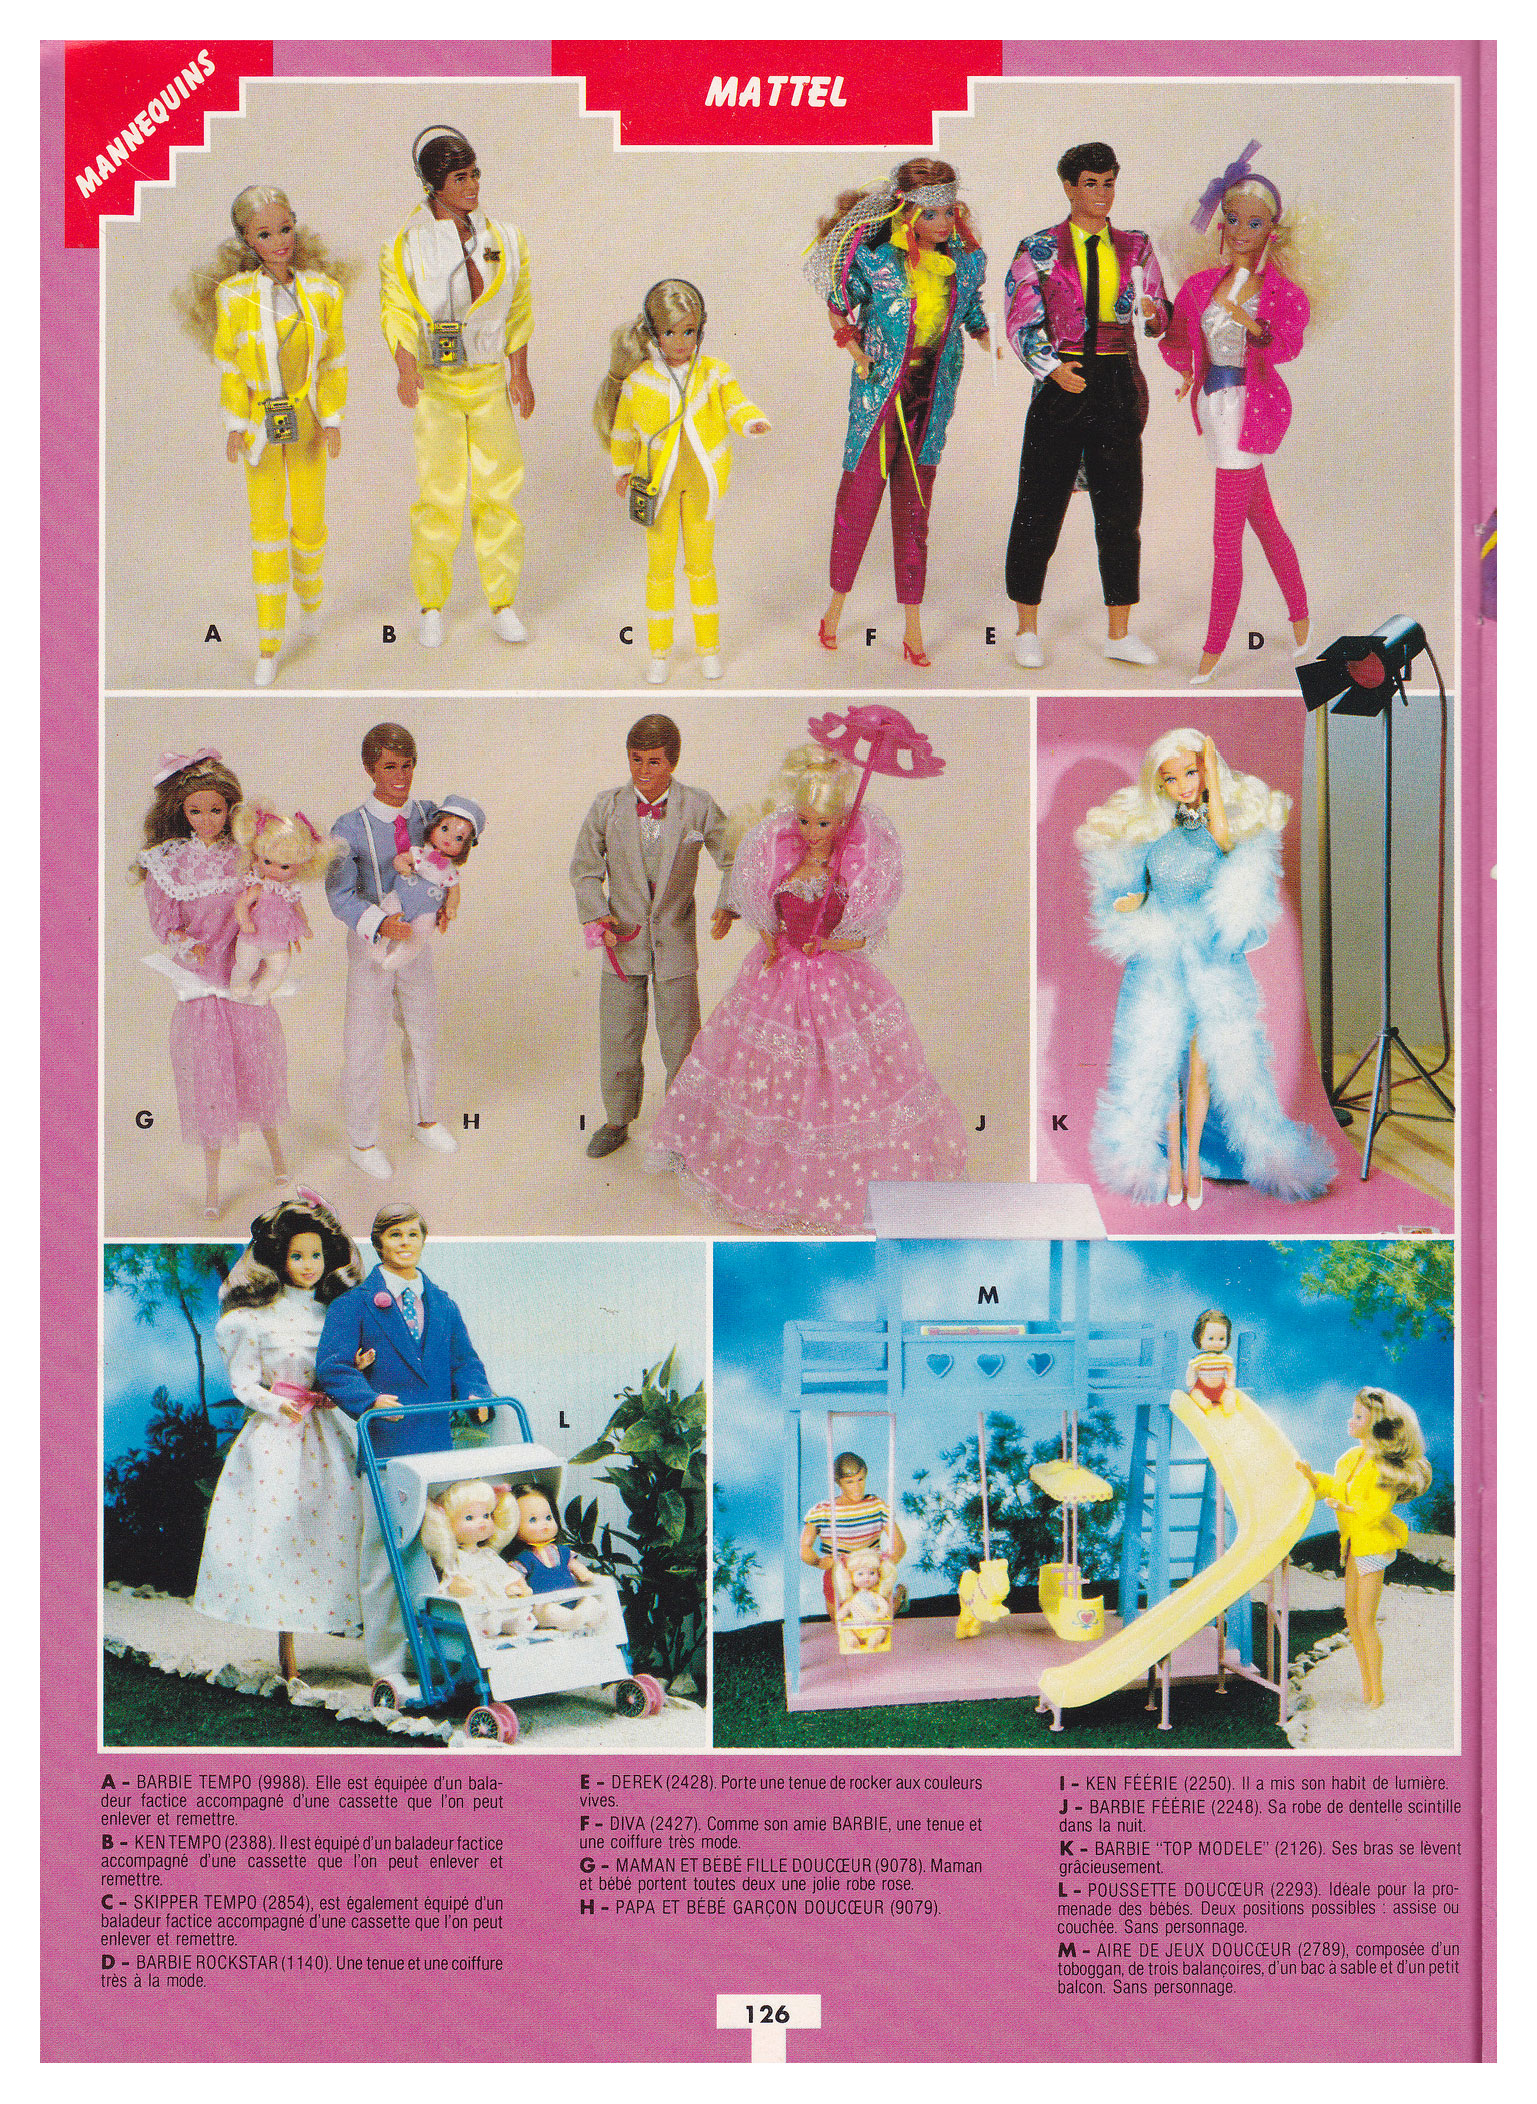 From 1986 French 1000 Jouets en Technicolor catalogue